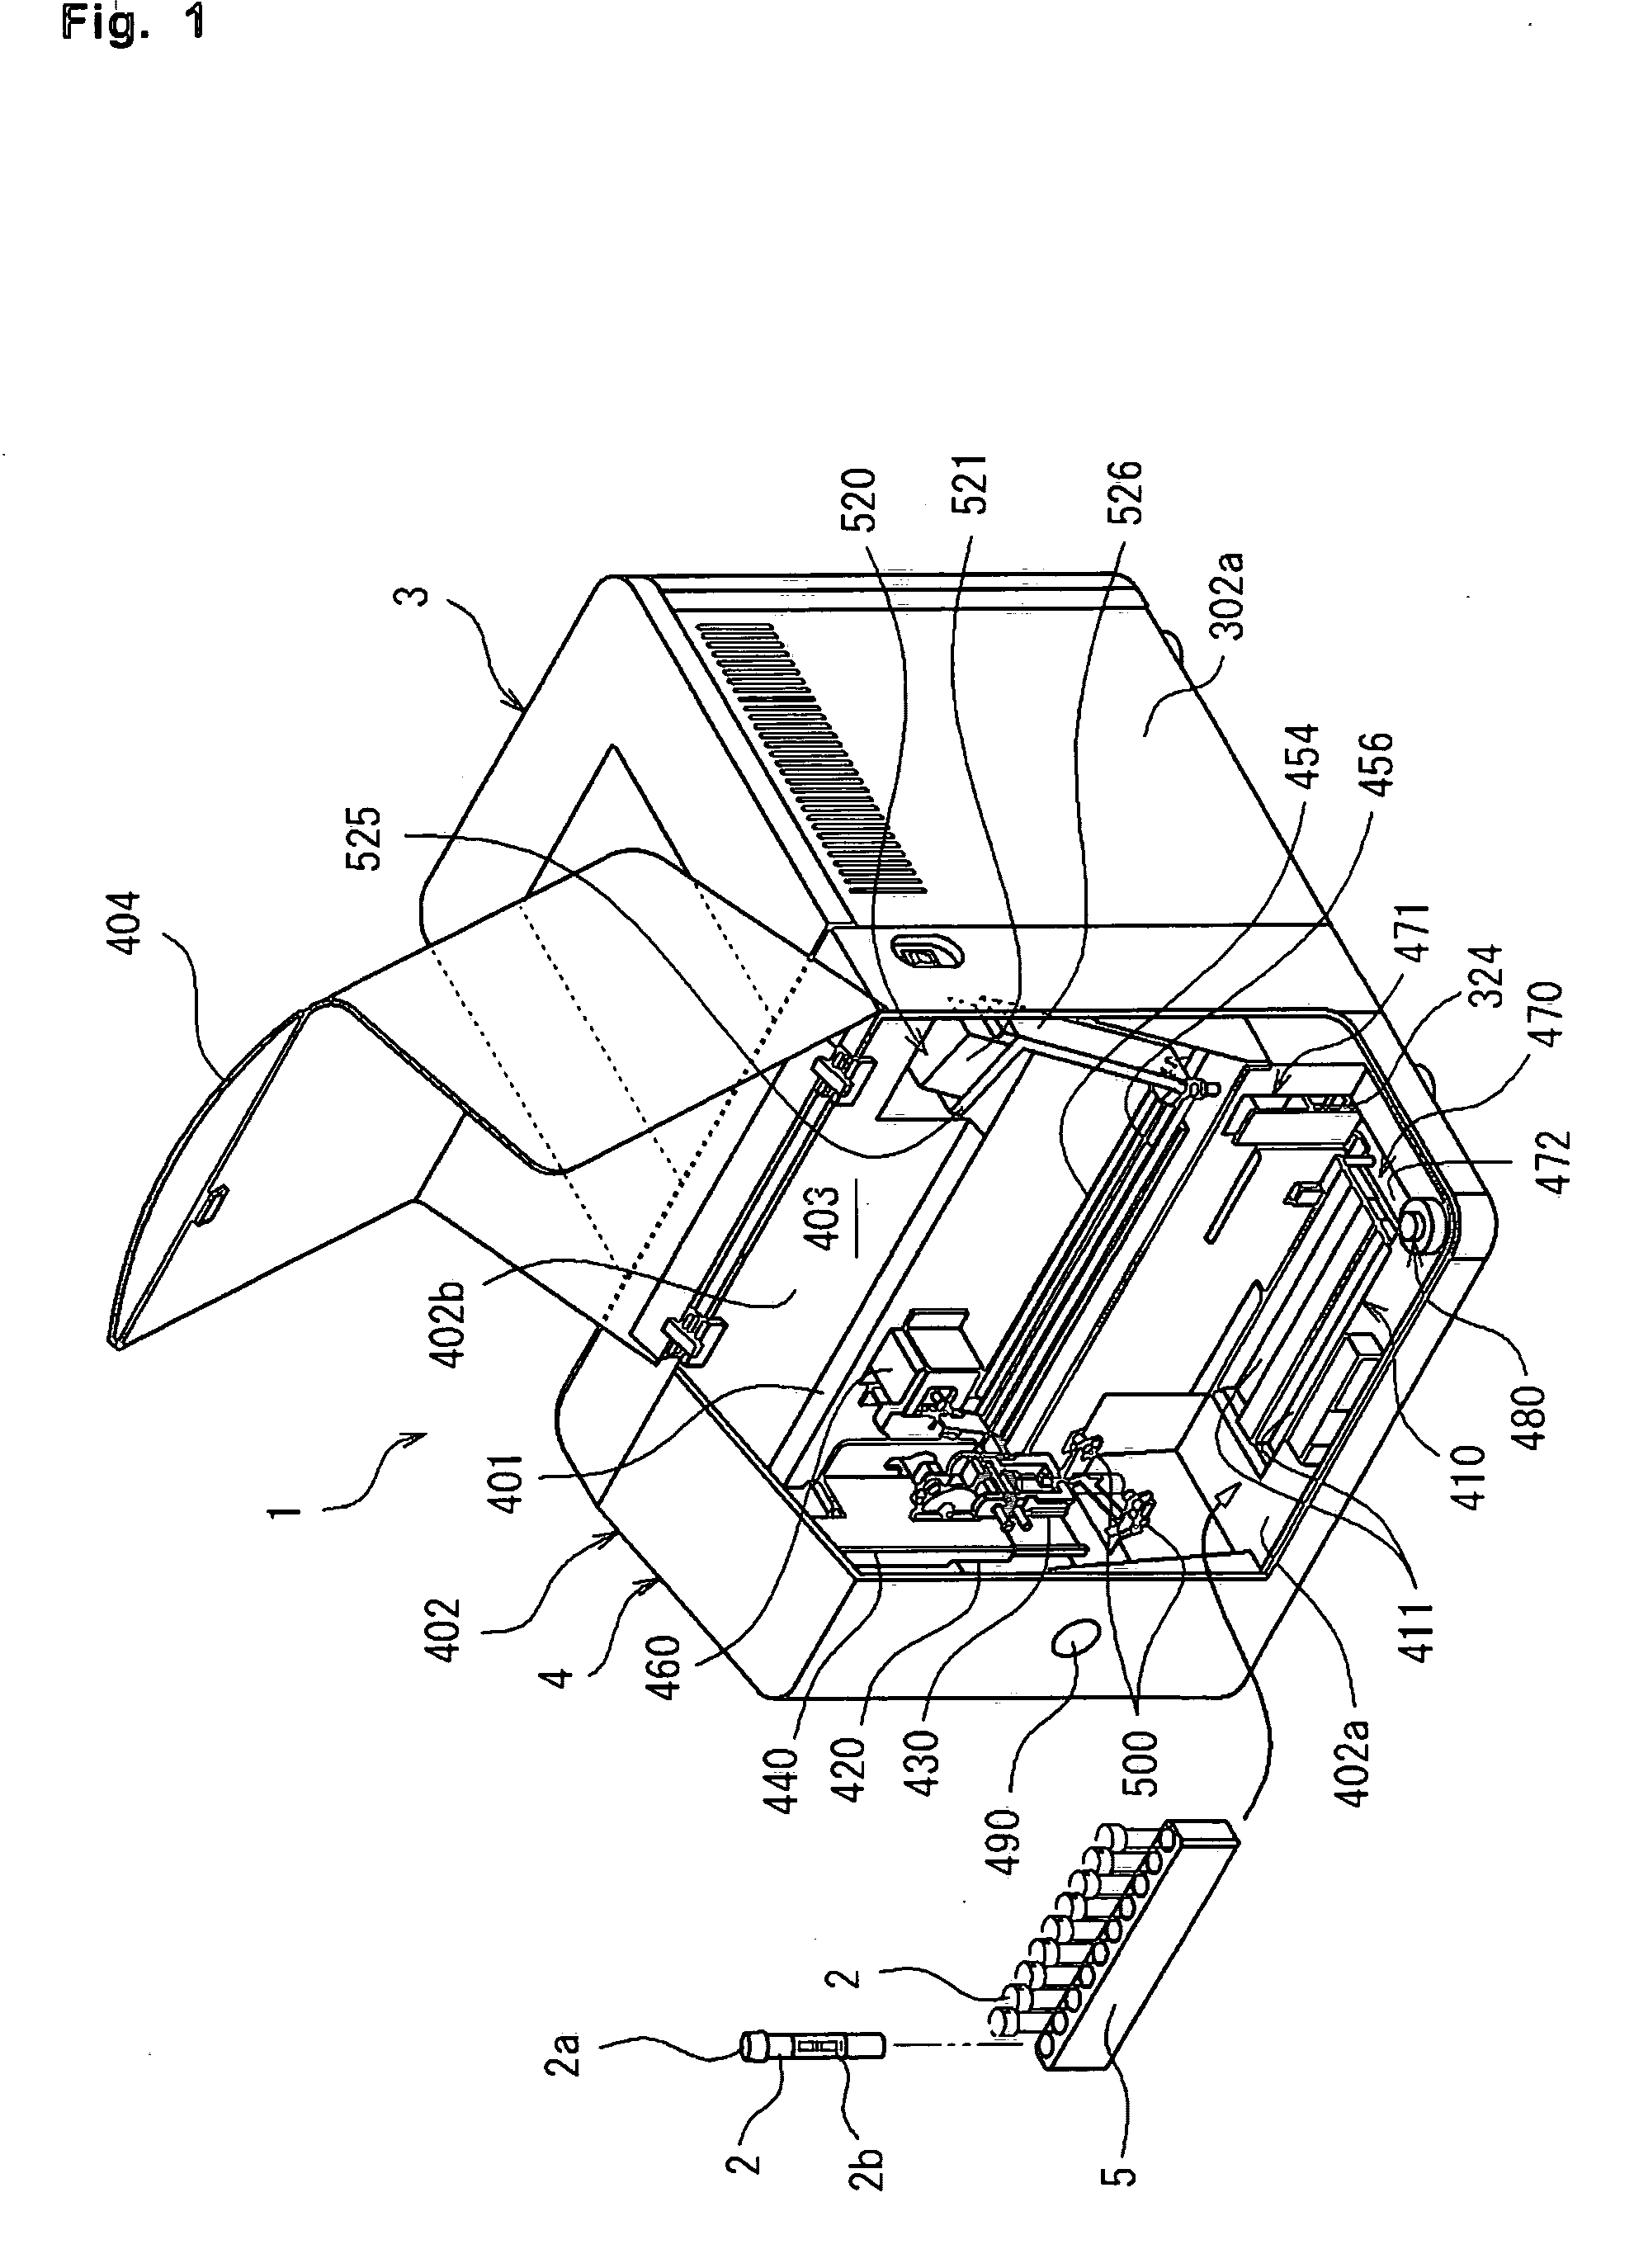 Sample analyzer and sample container supplying apparatus